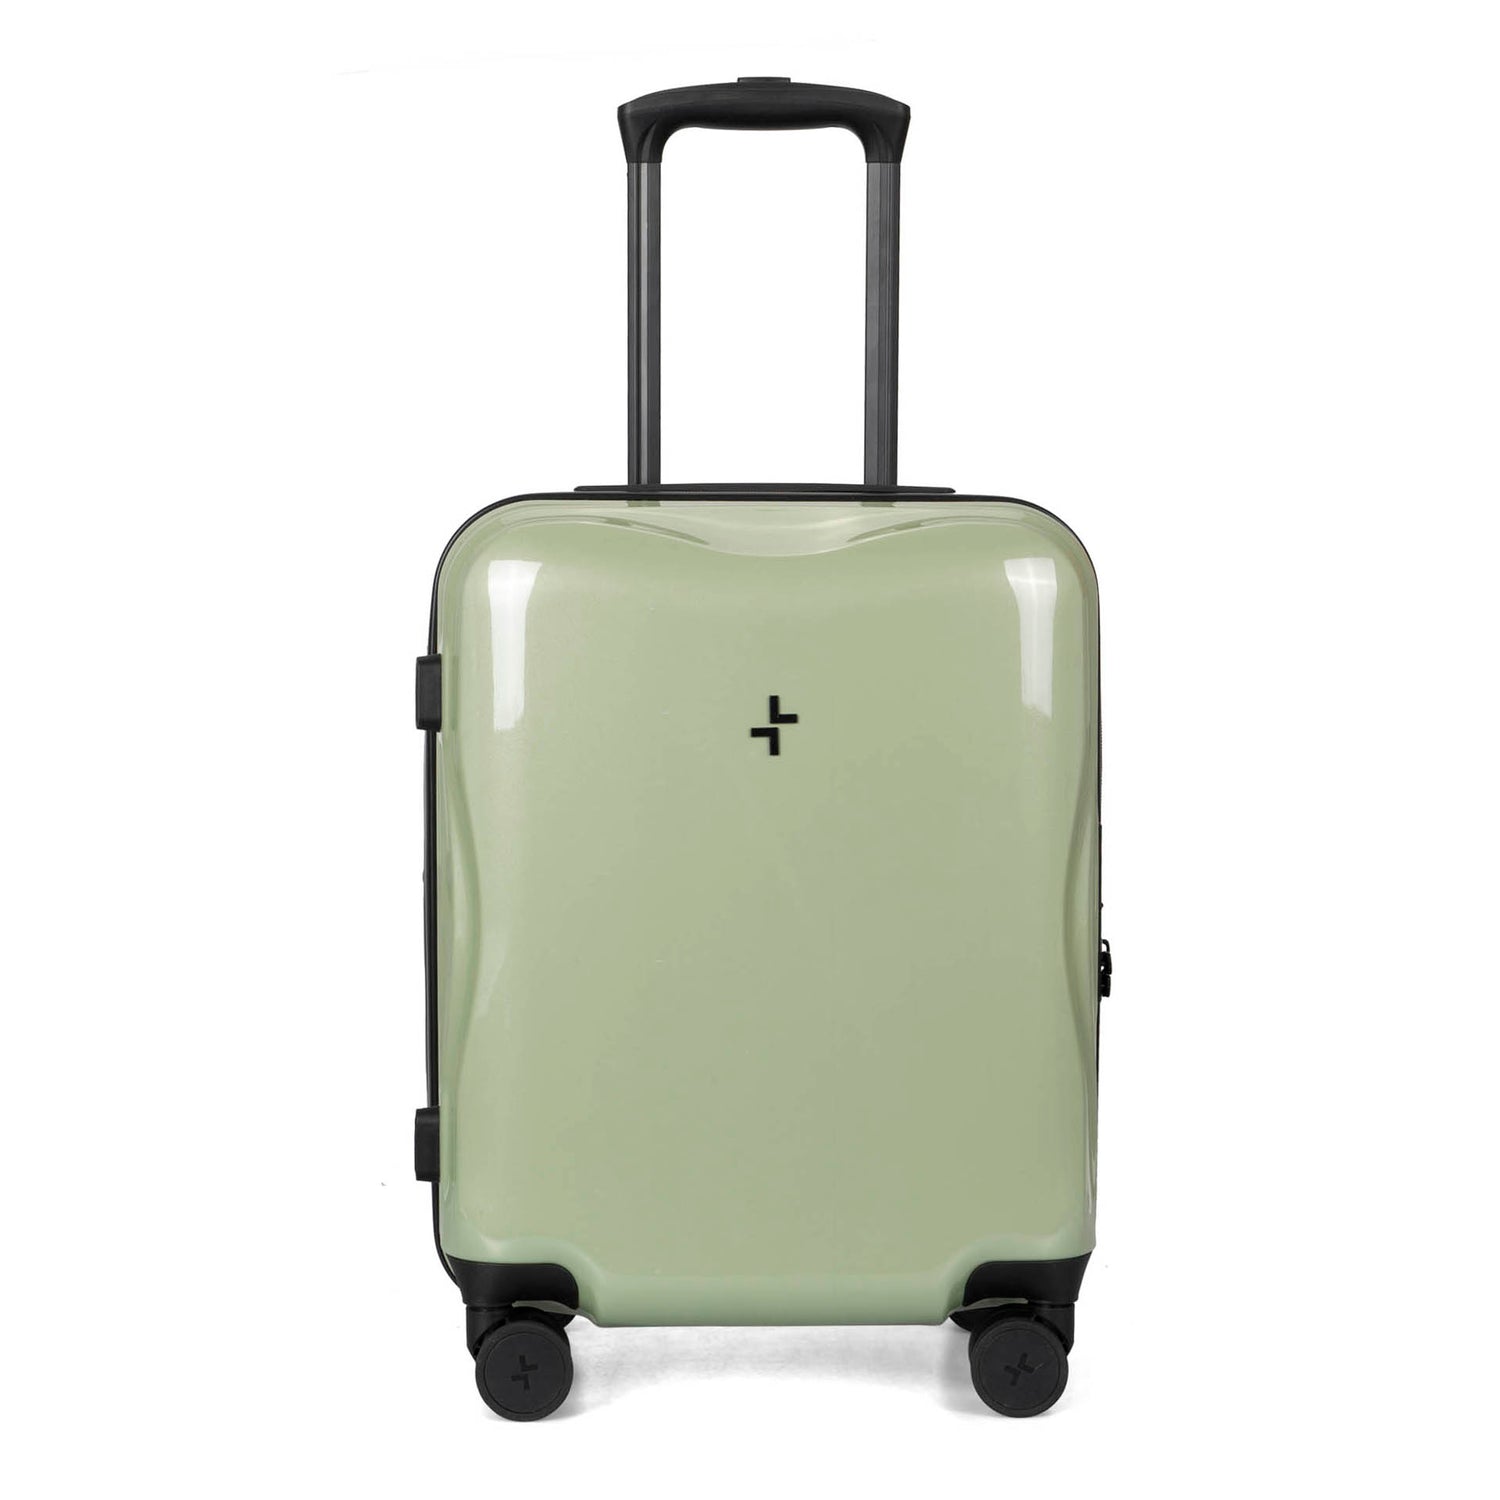 Capetown Hardside 19" Carry-On Luggage - Bentley